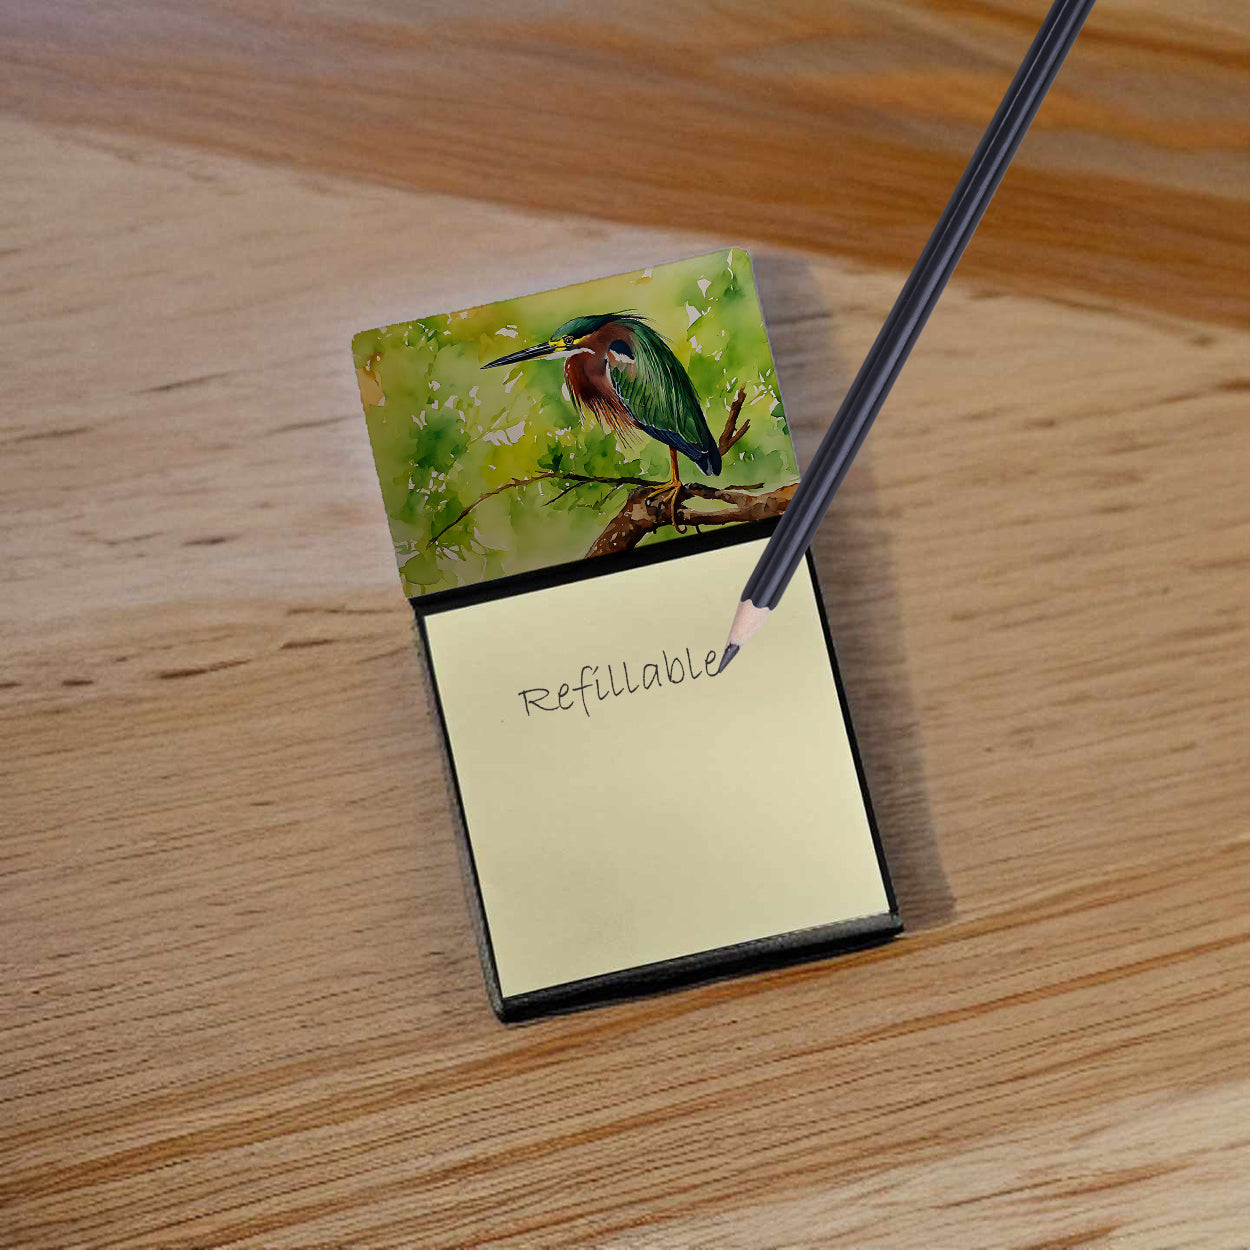 Buy this Green Heron Sticky Note Holder